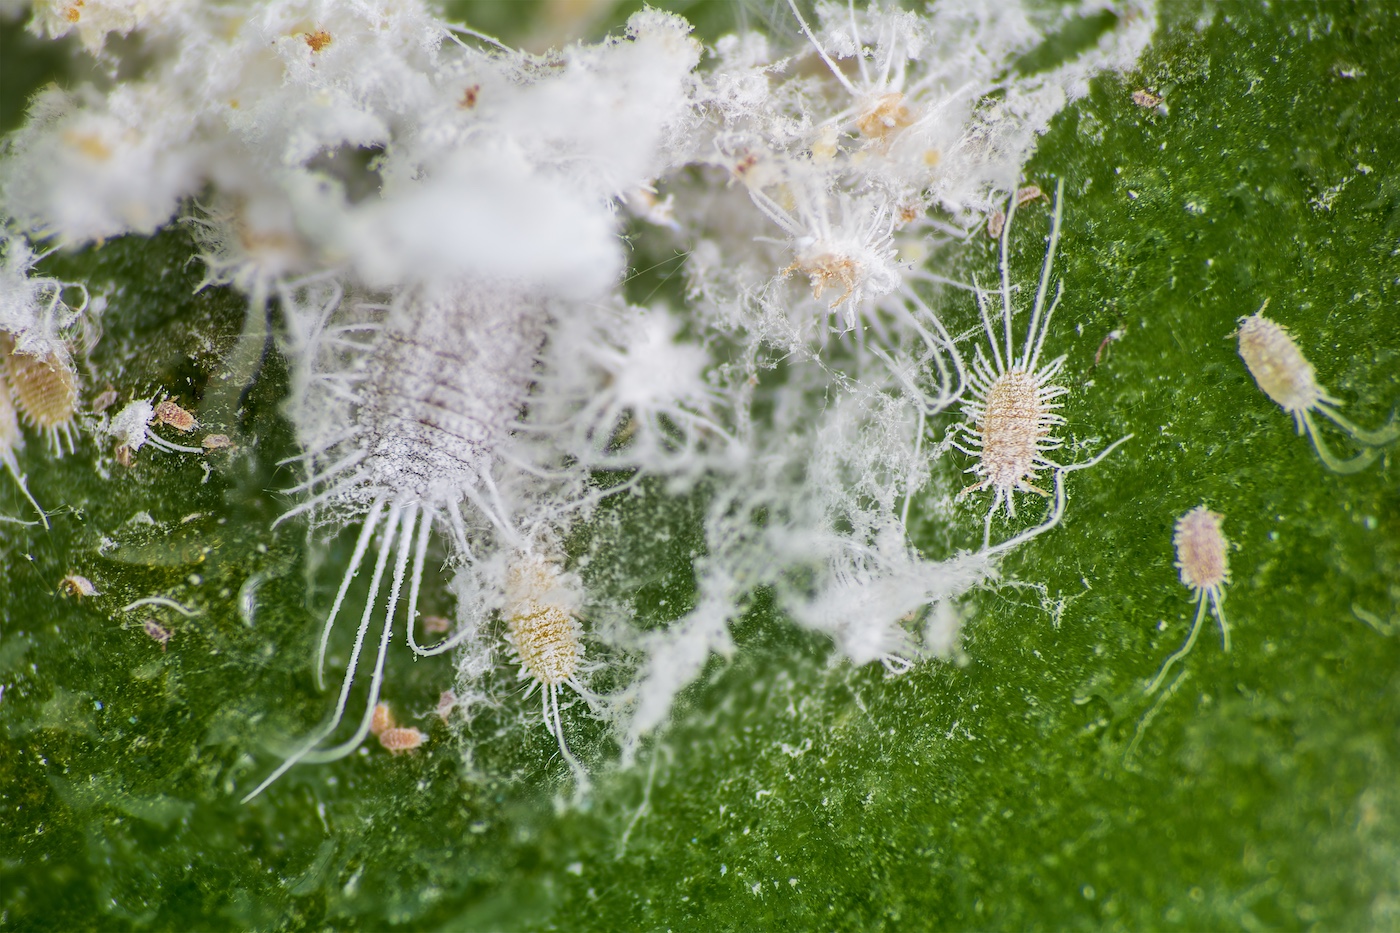 Mealybugs thriving on a plant surface